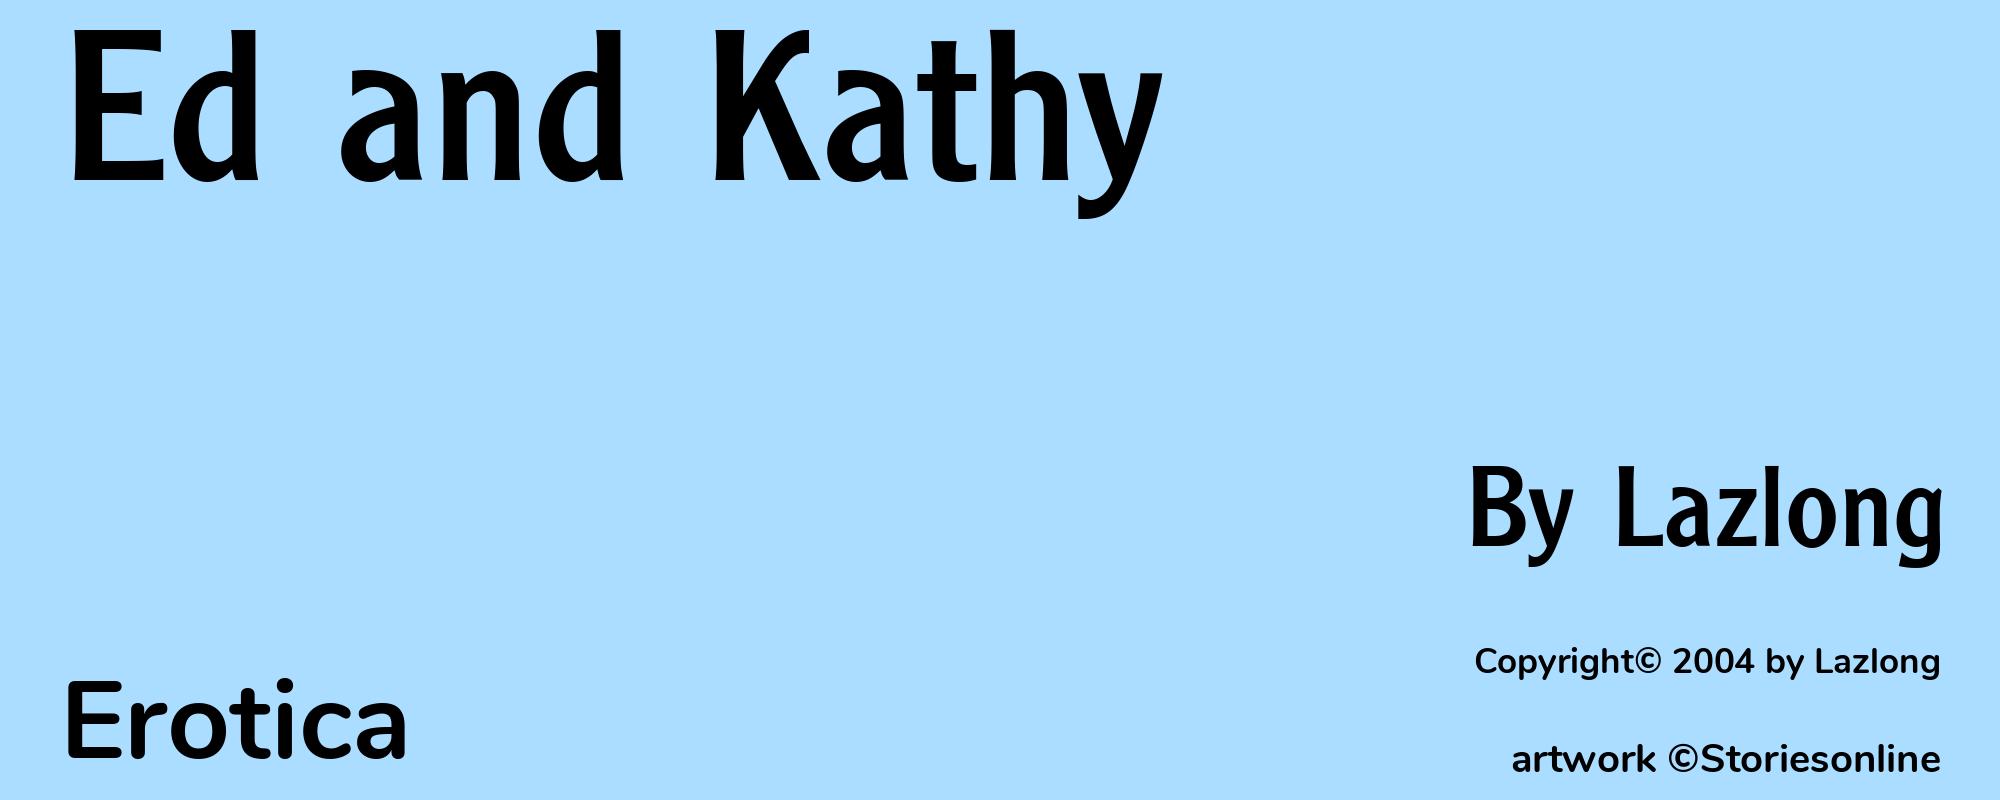 Ed and Kathy - Cover